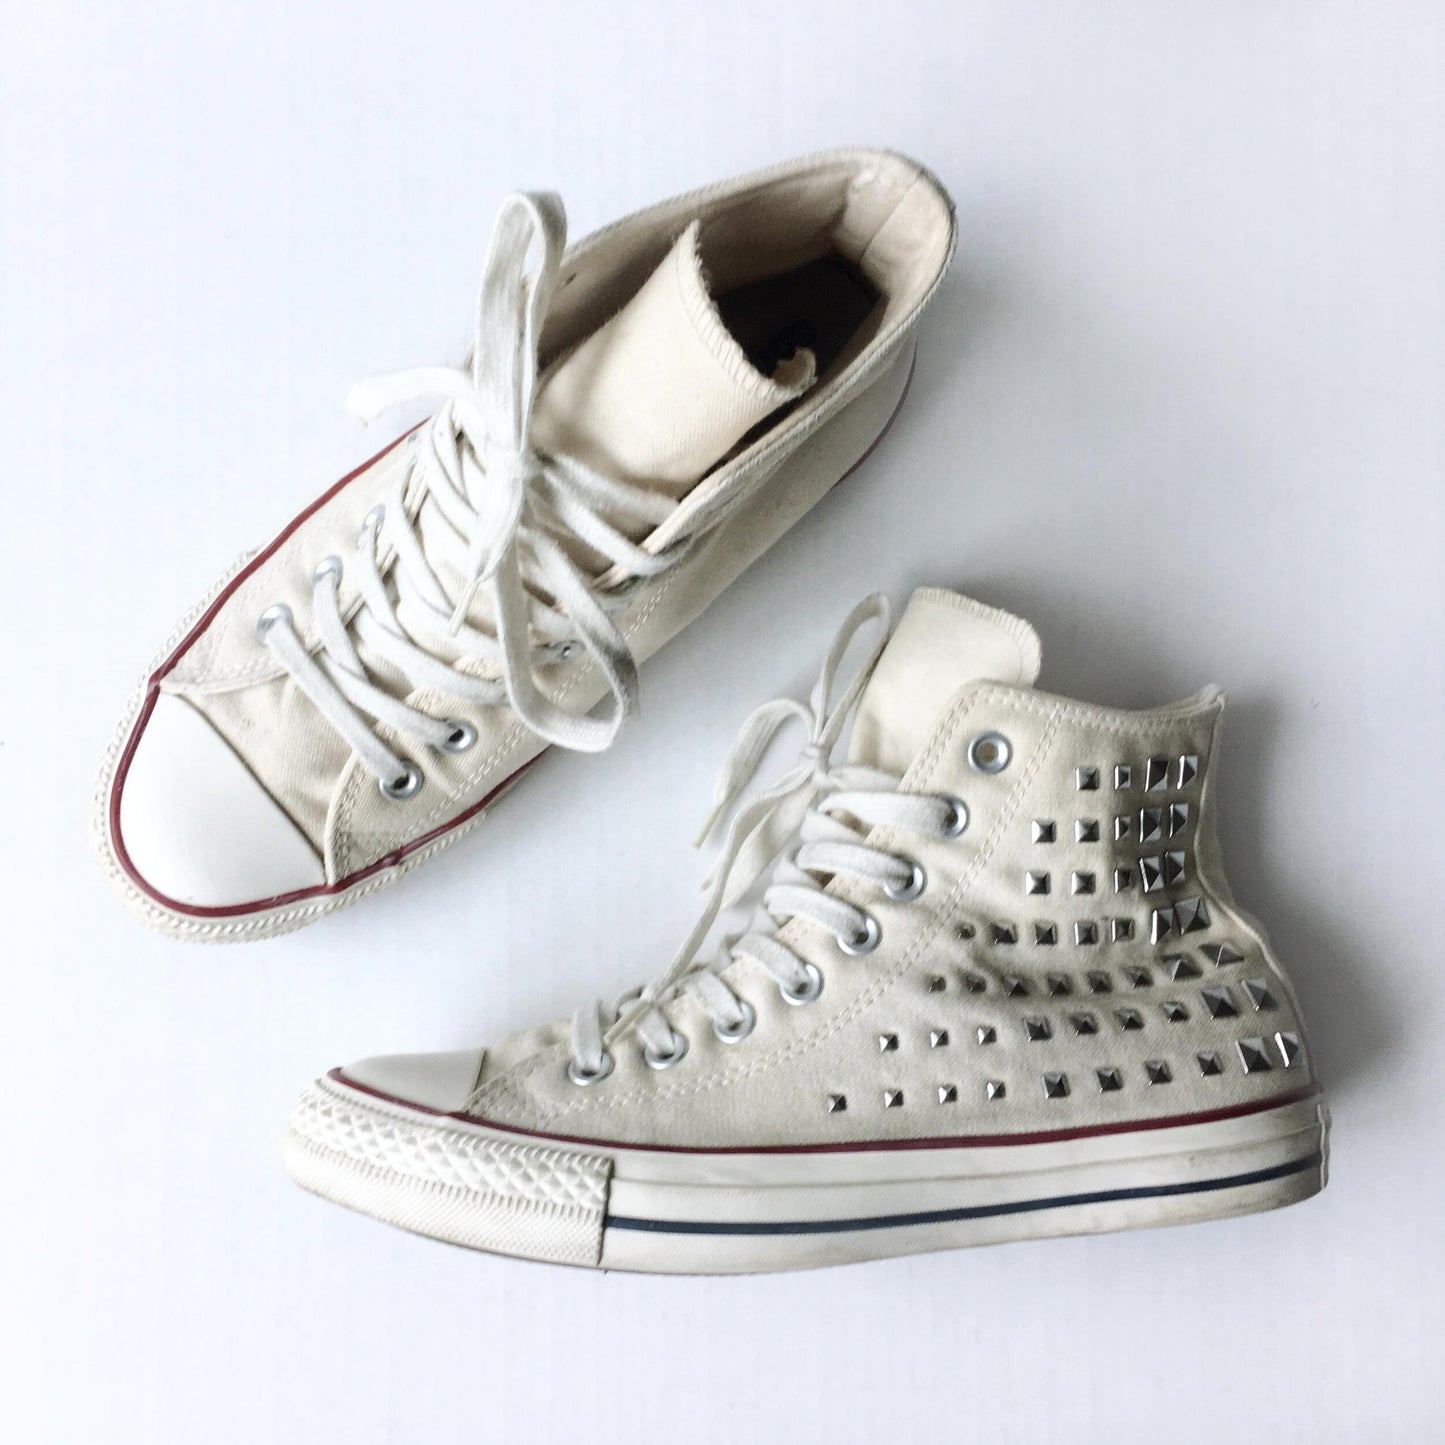 Converse All Star Studded High Tops - size 9